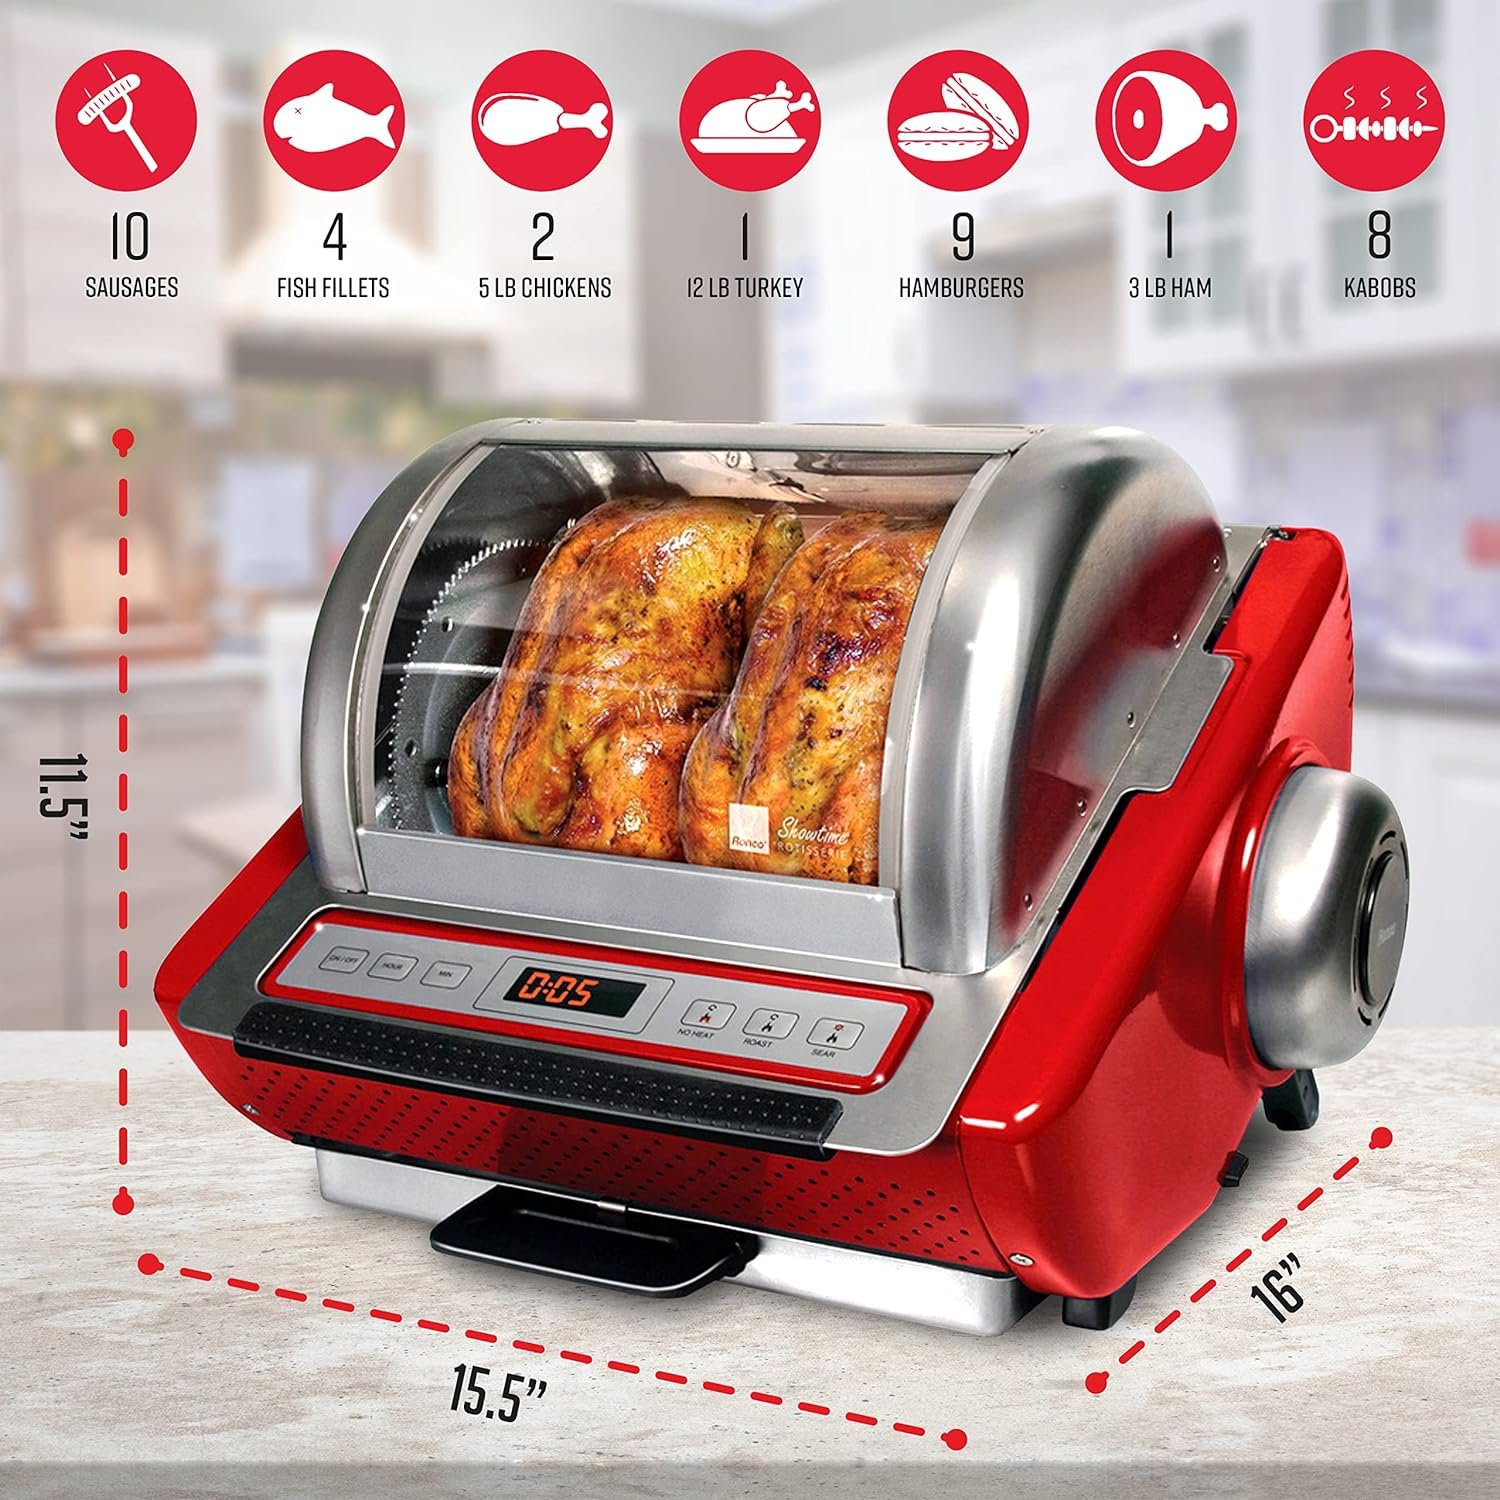 Ronco Showtime EZ-Store Large Capacity Rotisserie  BBQ Oven, Digital Controls, Compact Storage, Perfect Preset Rotation Speed, Self-Basting, Auto Shutoff, Includes Multipurpose Basket, red